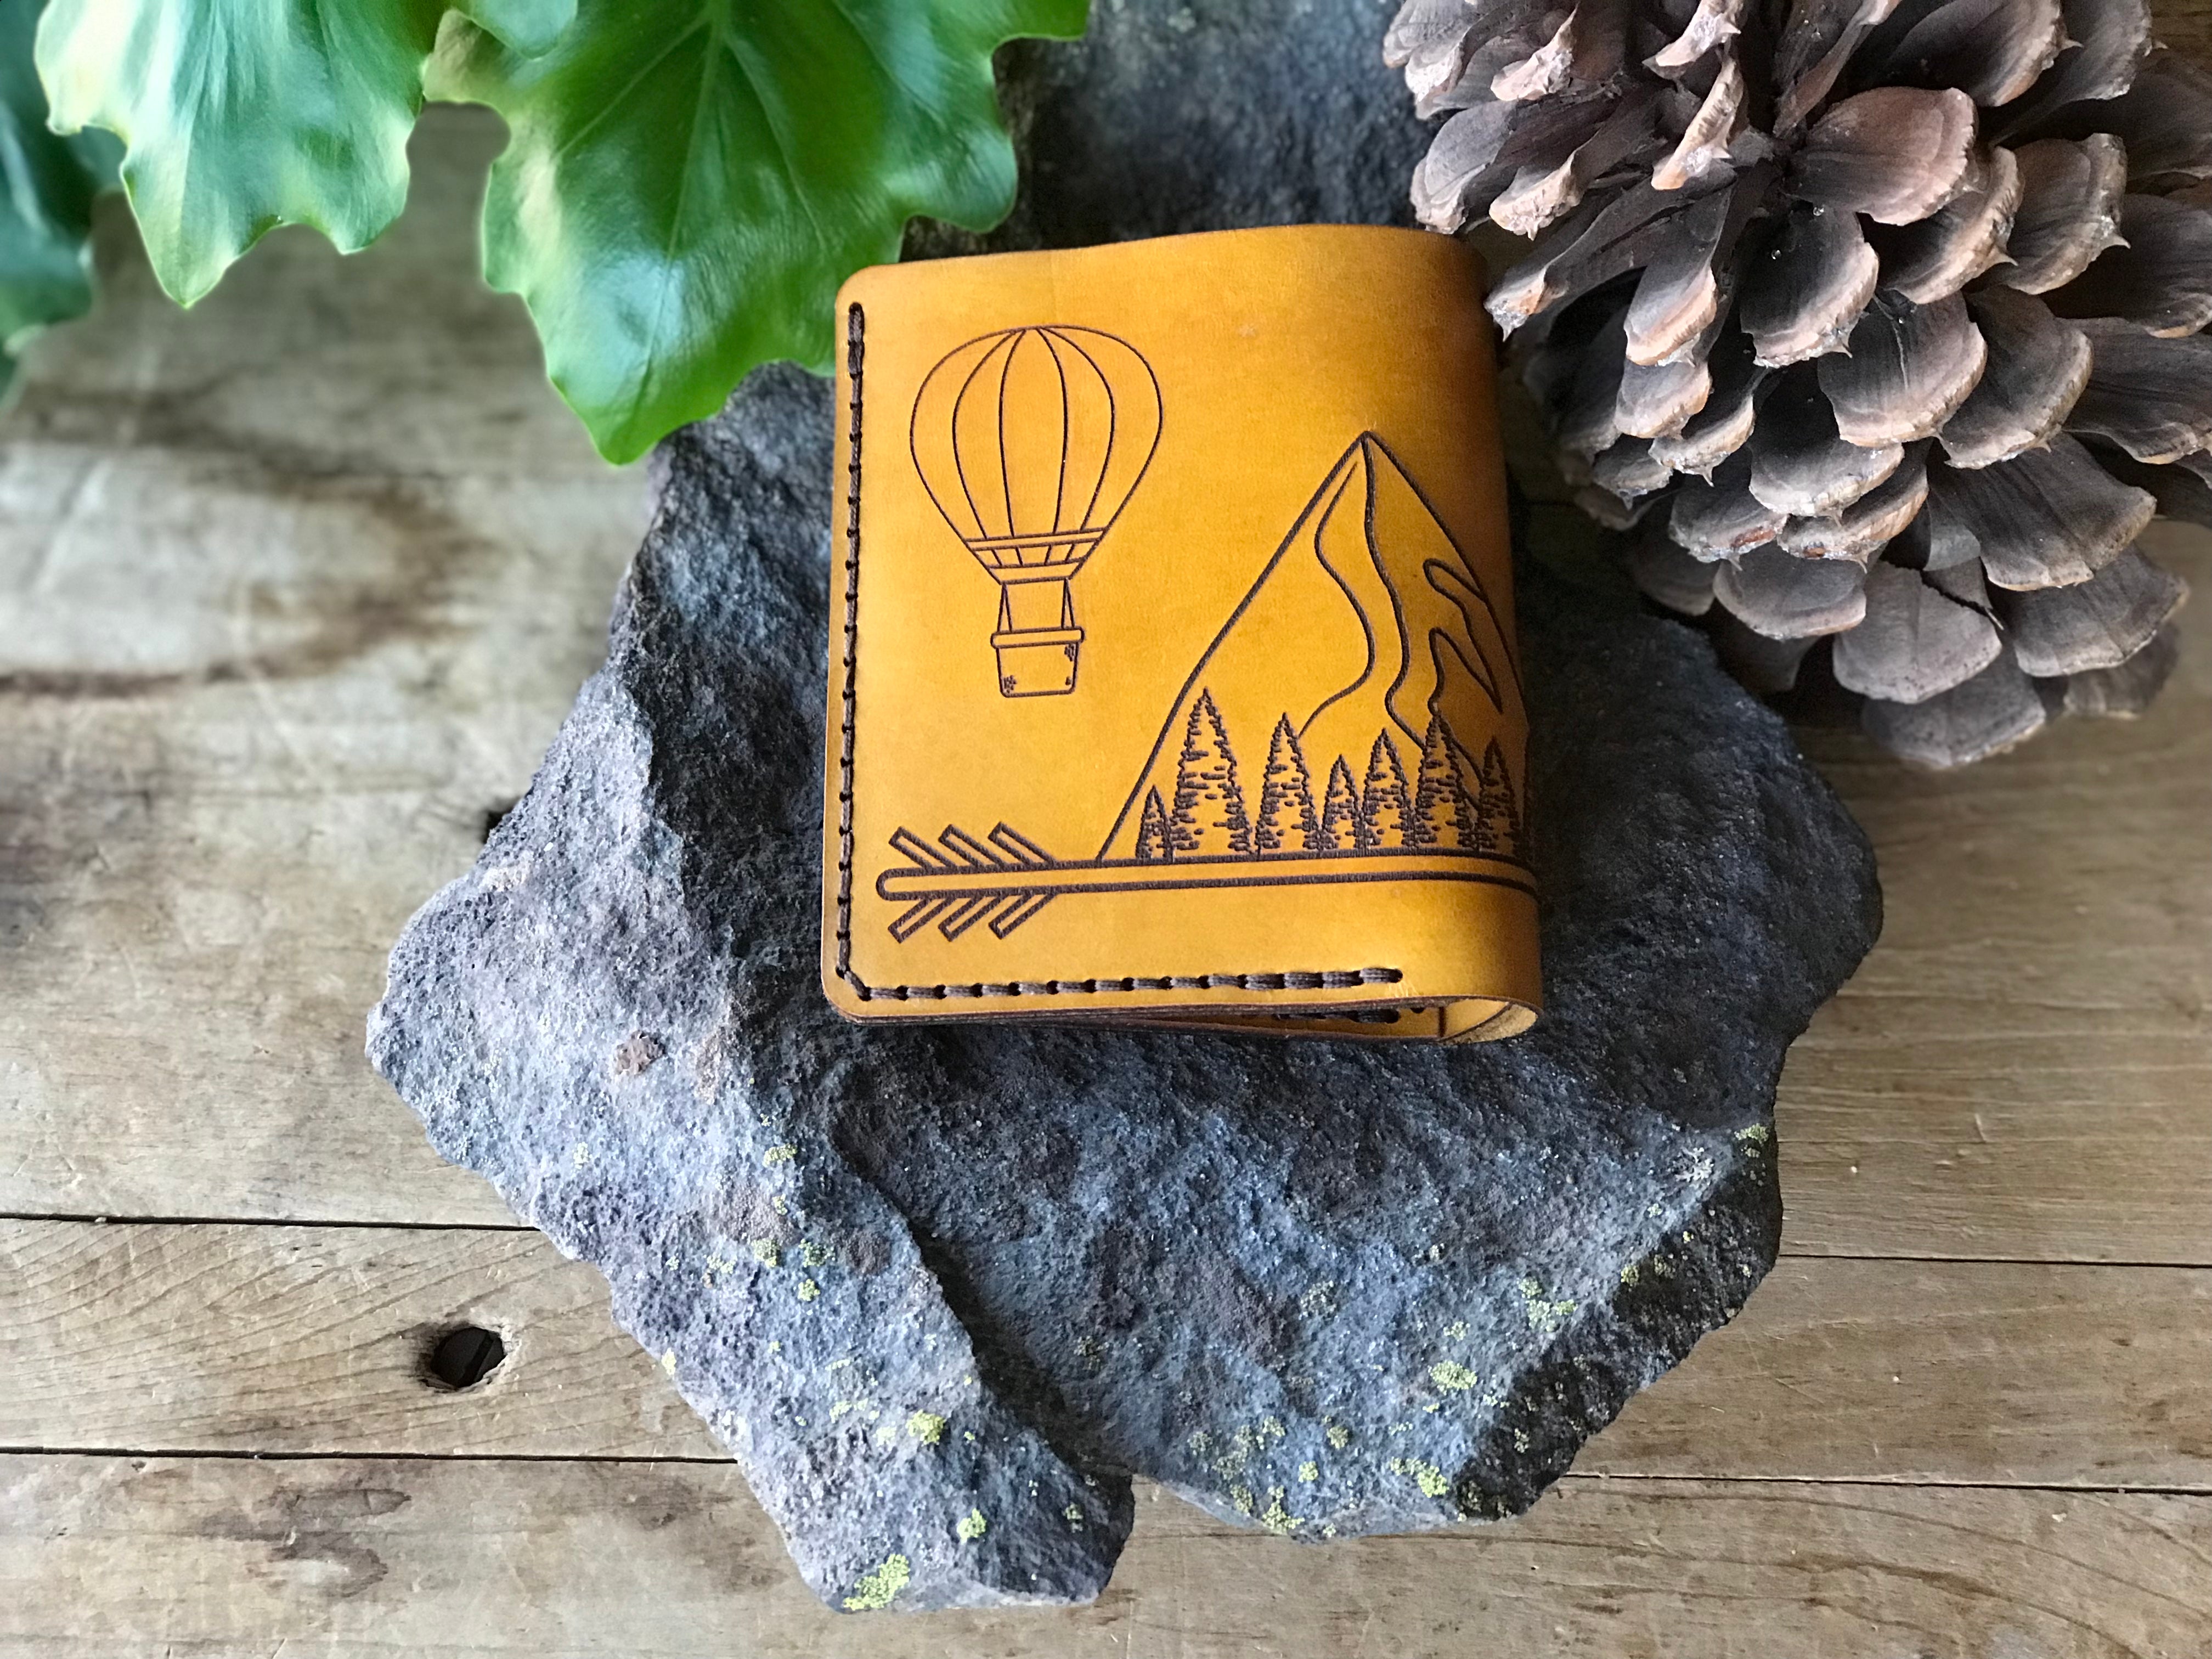 The Sky’s the Limit Leather Bifold Wallet